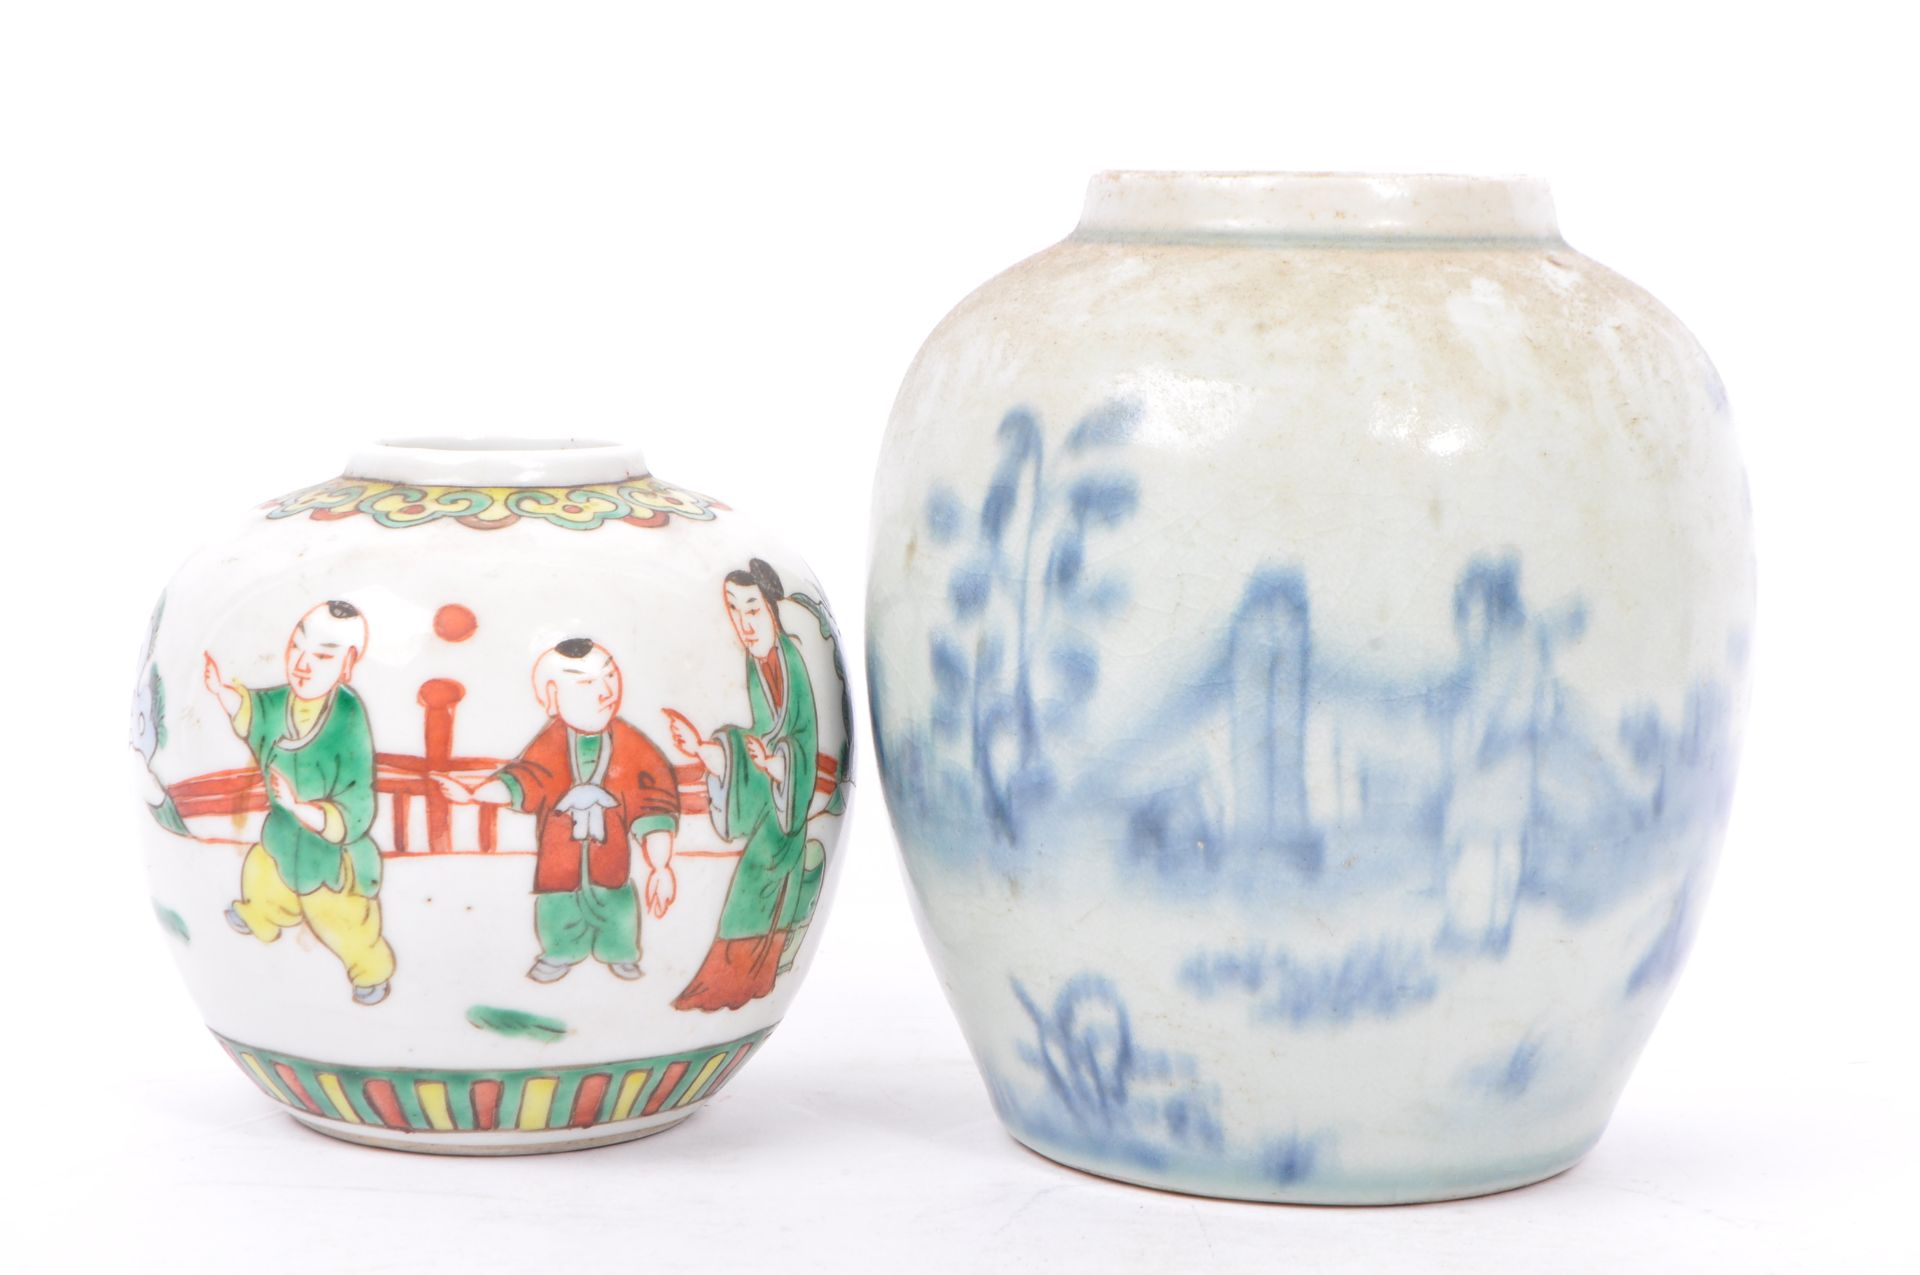 COLLECTION OF 19TH CENTURY CHINESE PORCELAIN GINGER JARS - Image 5 of 8